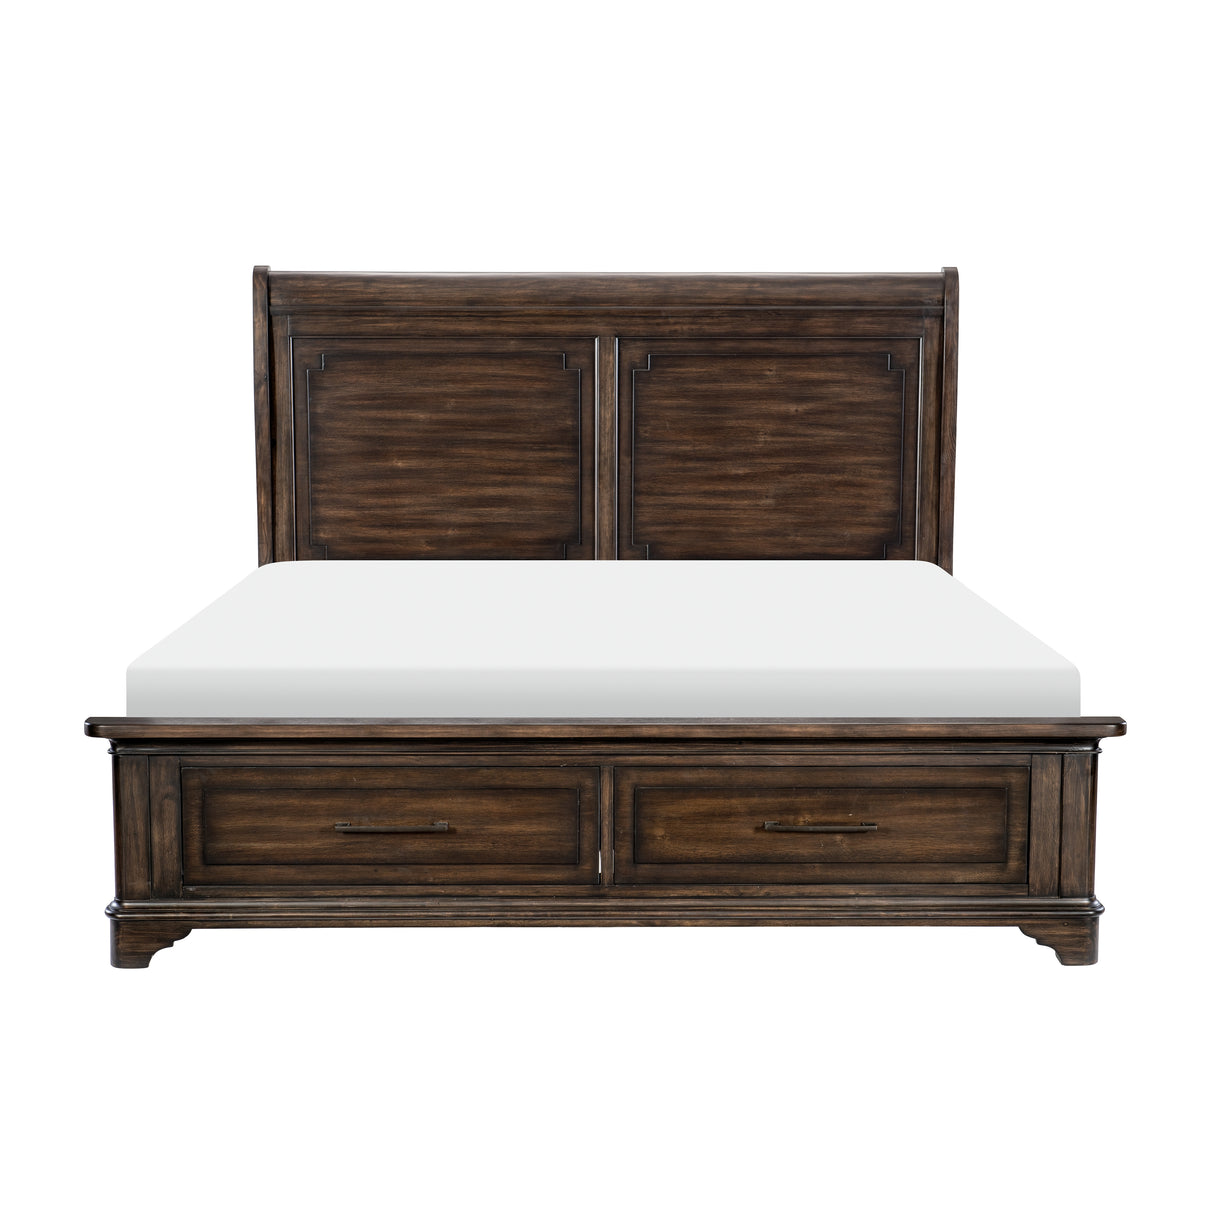 Boone Eastern King Platform Bed With Footboard Storage